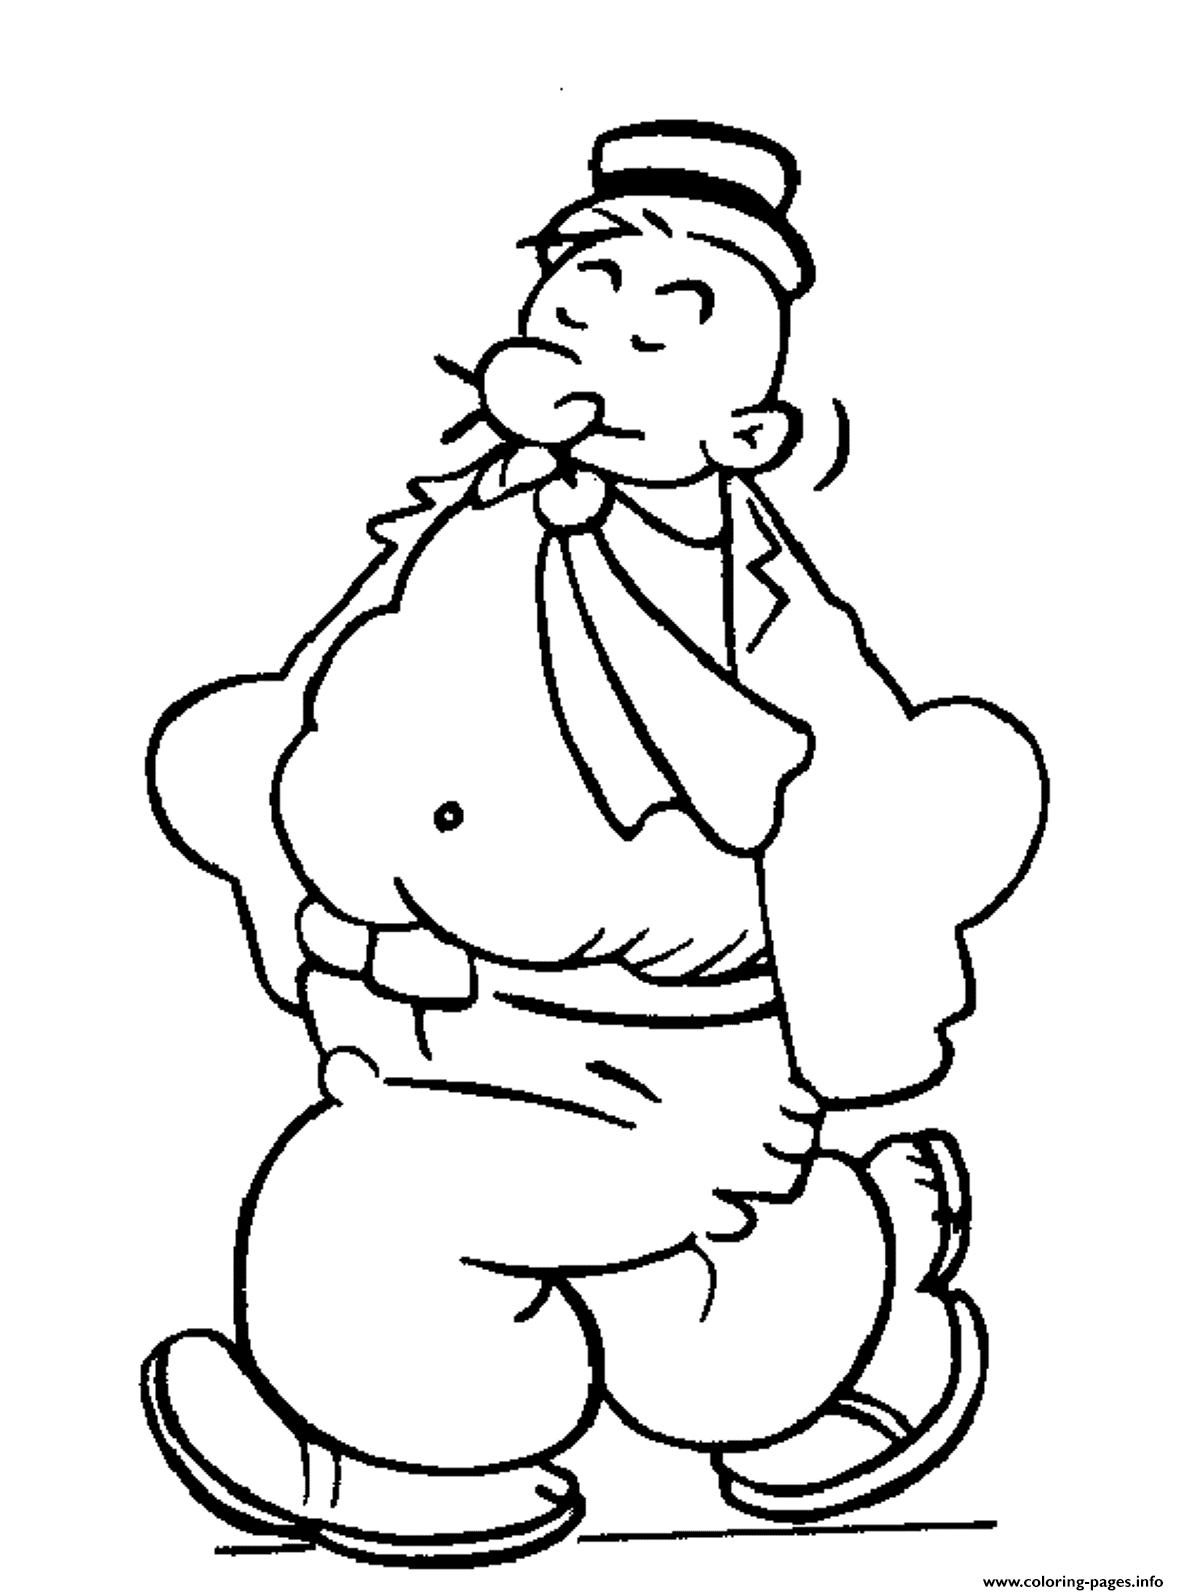 Print wimpy of popeye s4975 Coloring pages